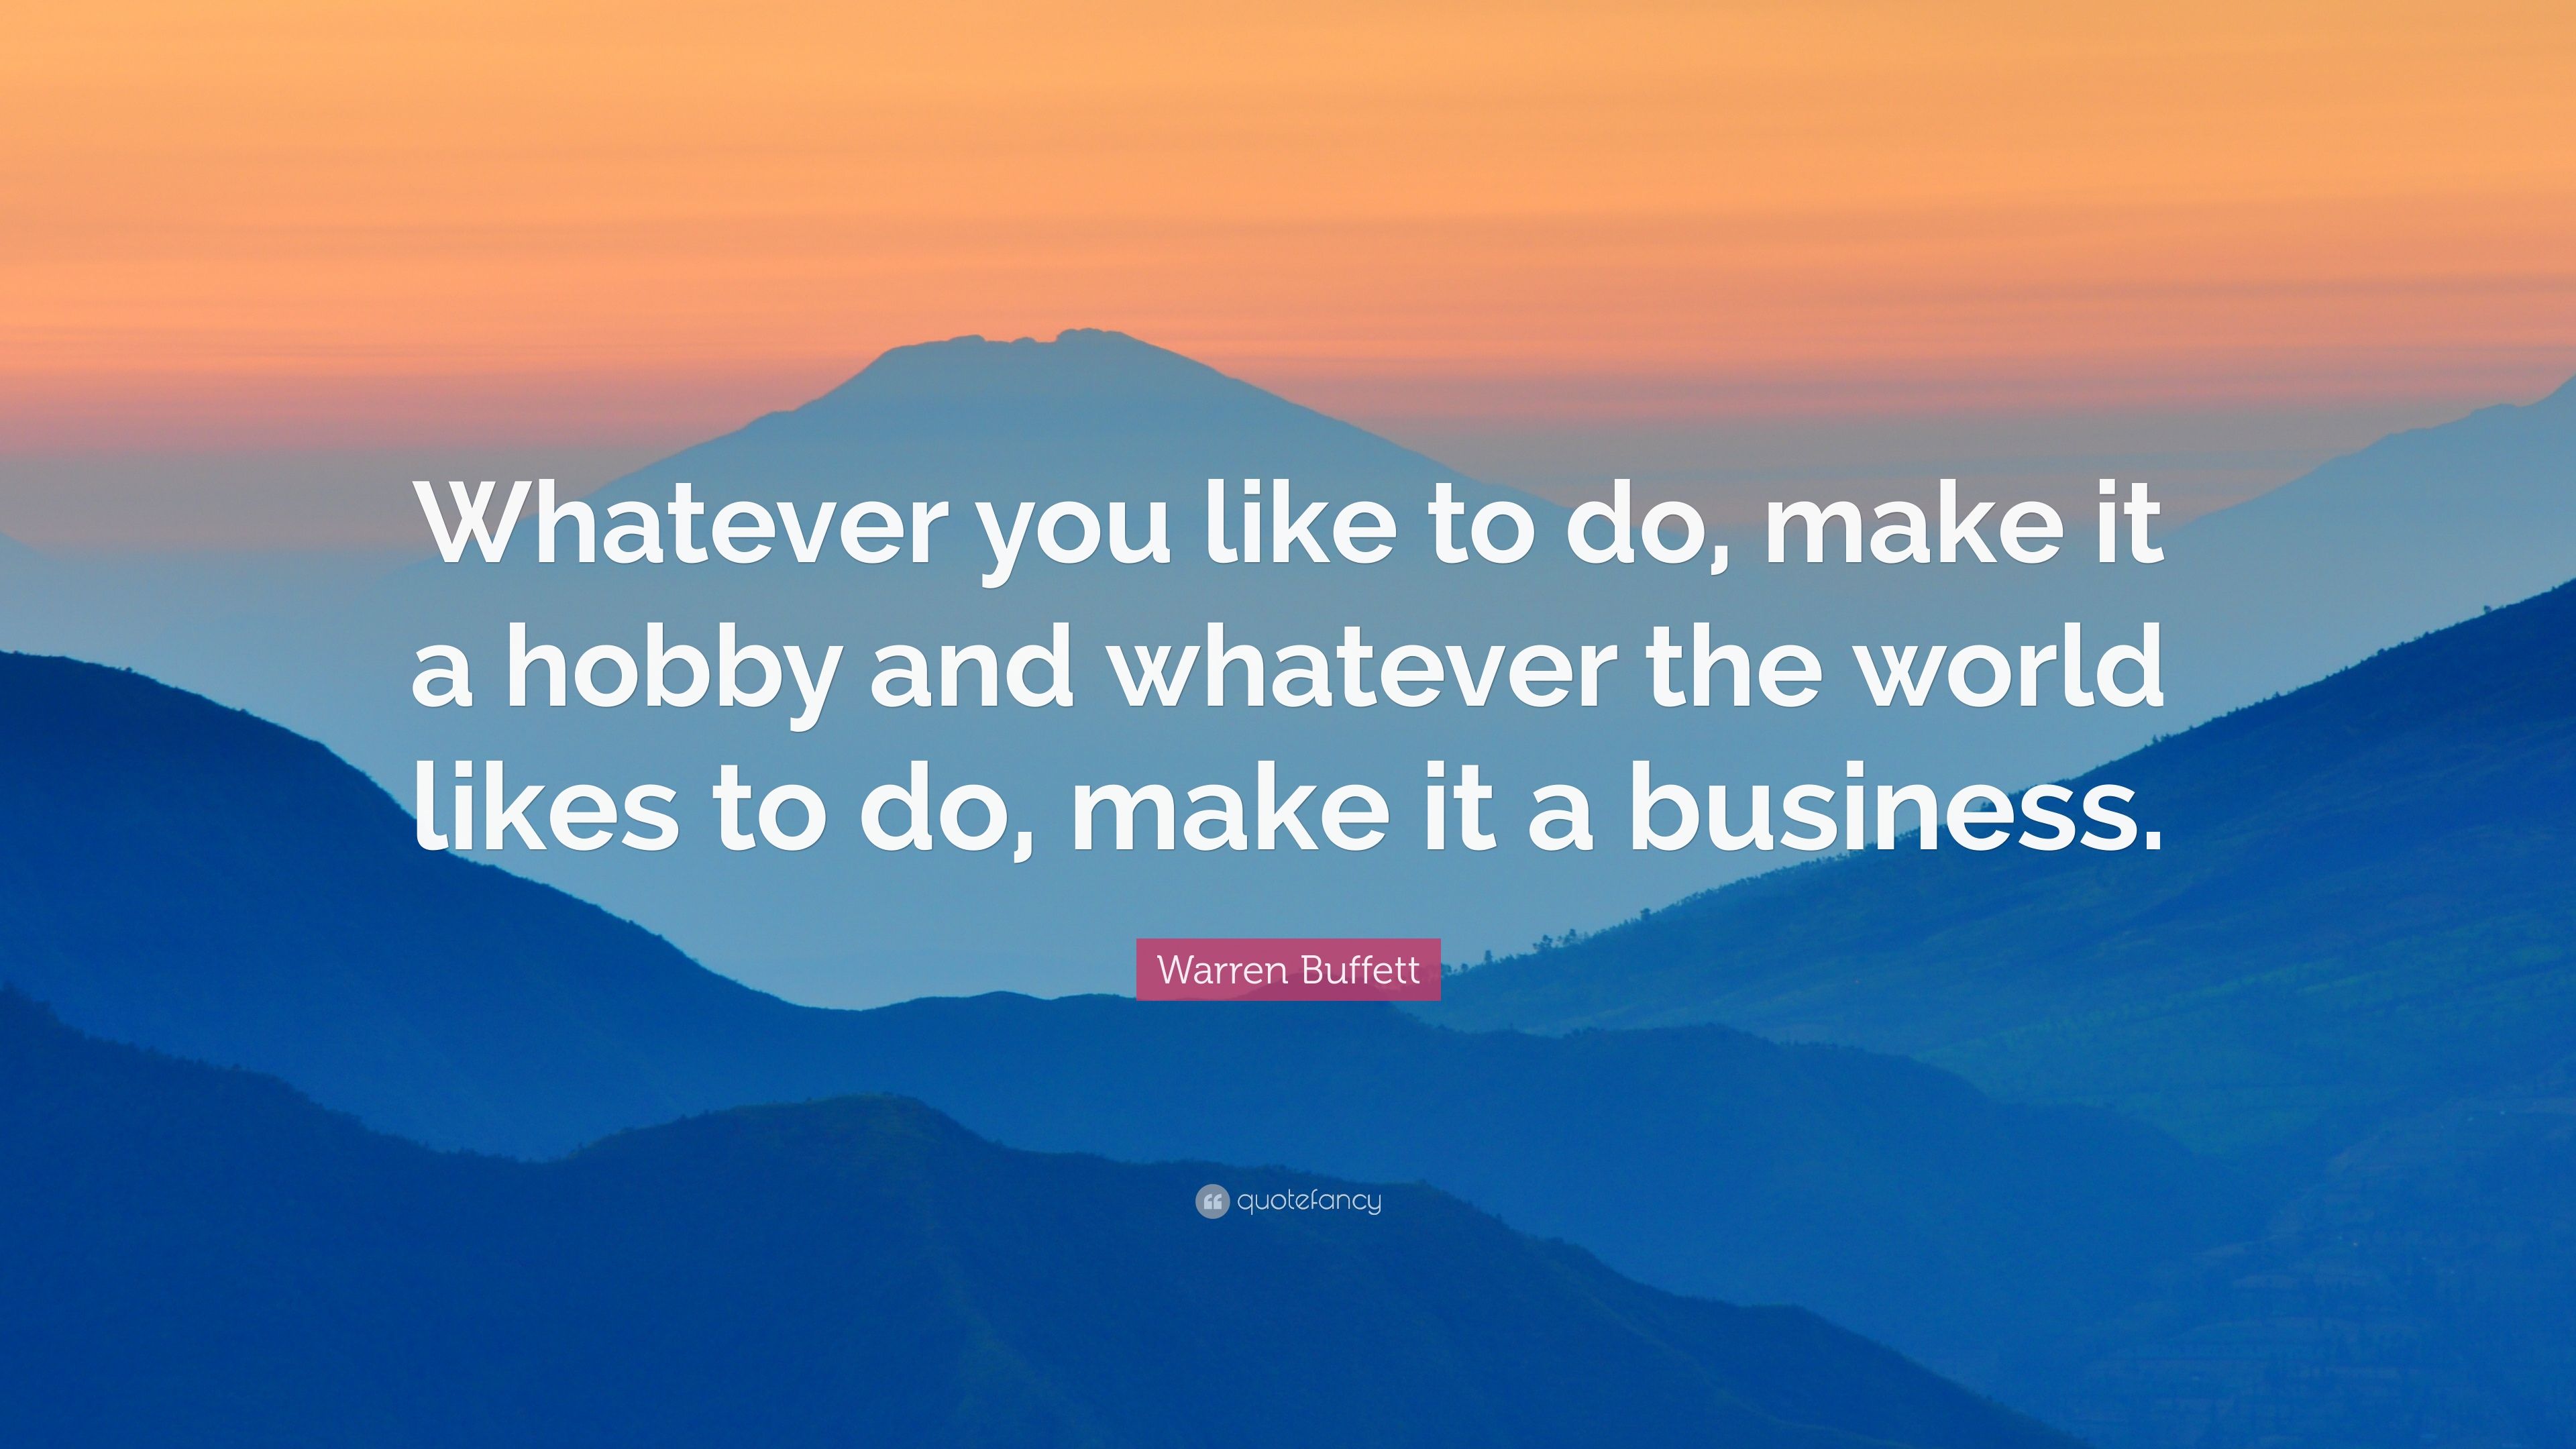 Warren Buffett Quote: “Whatever you like to do, make it a hobby